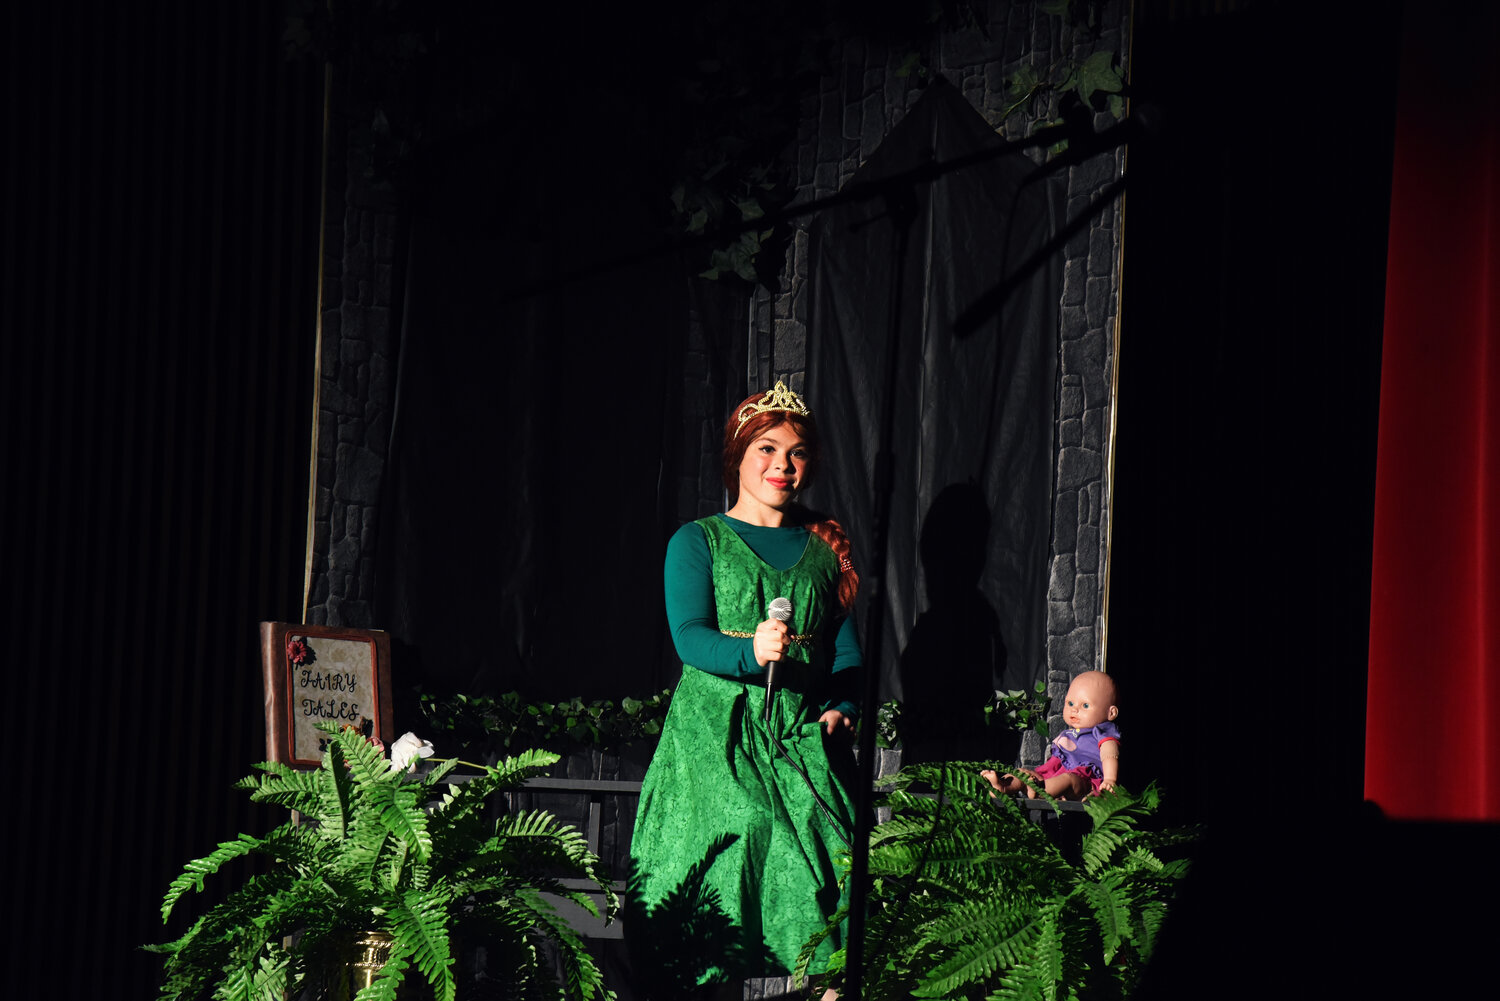 Zoee Tyler played Young Fiona in Frederick Middle School’s production of Shrek the Musical, Jr.